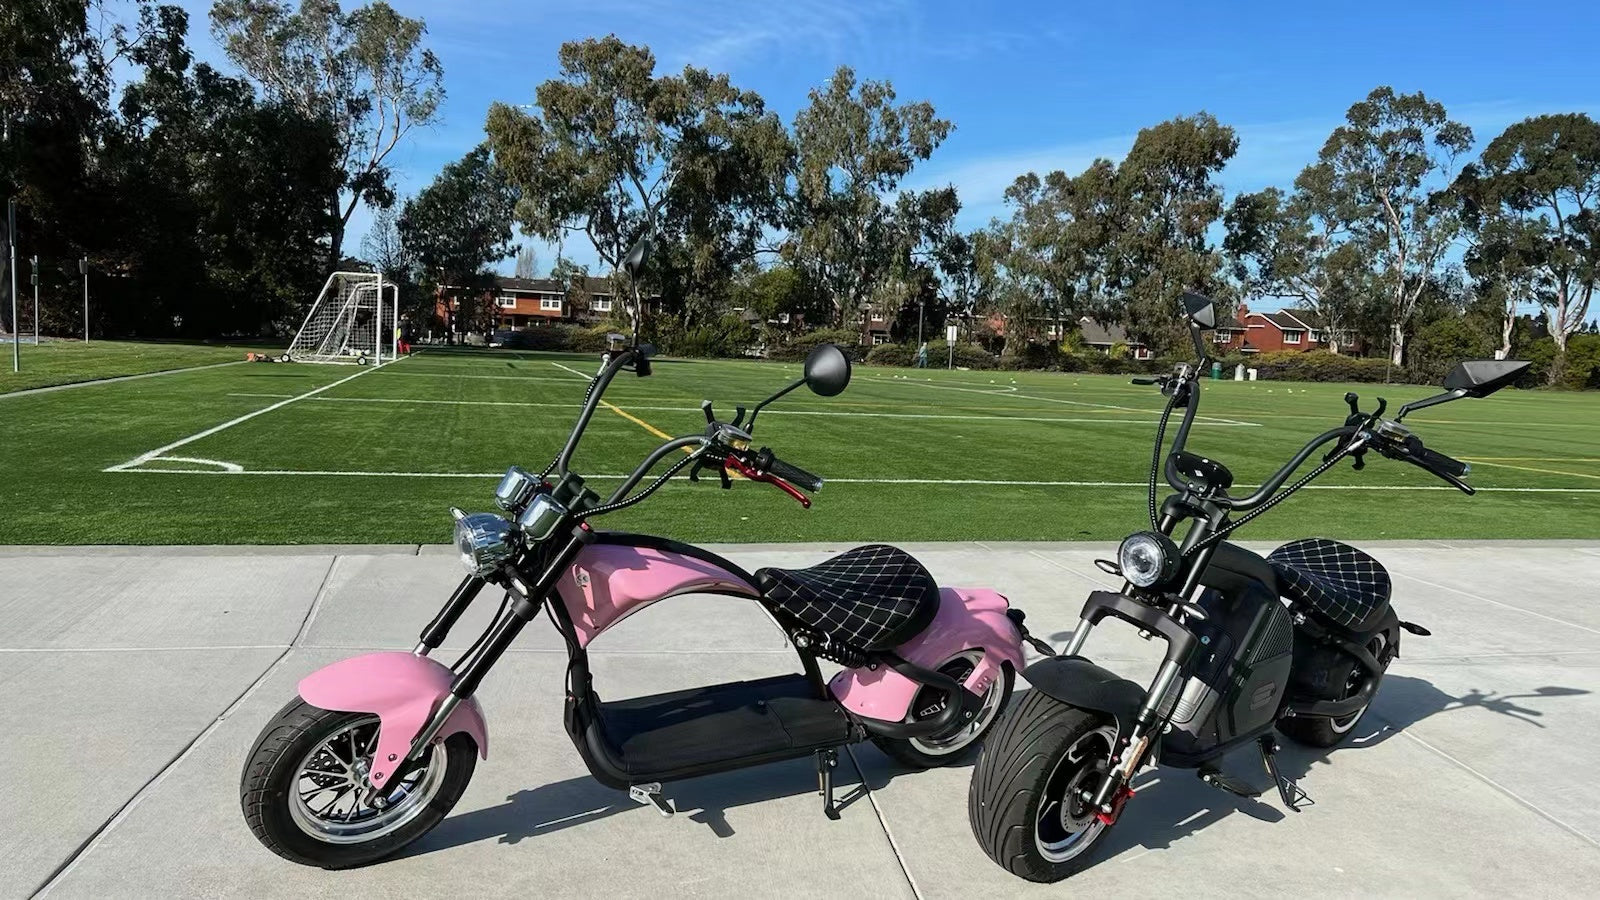 The Best 3 Electric Scooters from Eahora